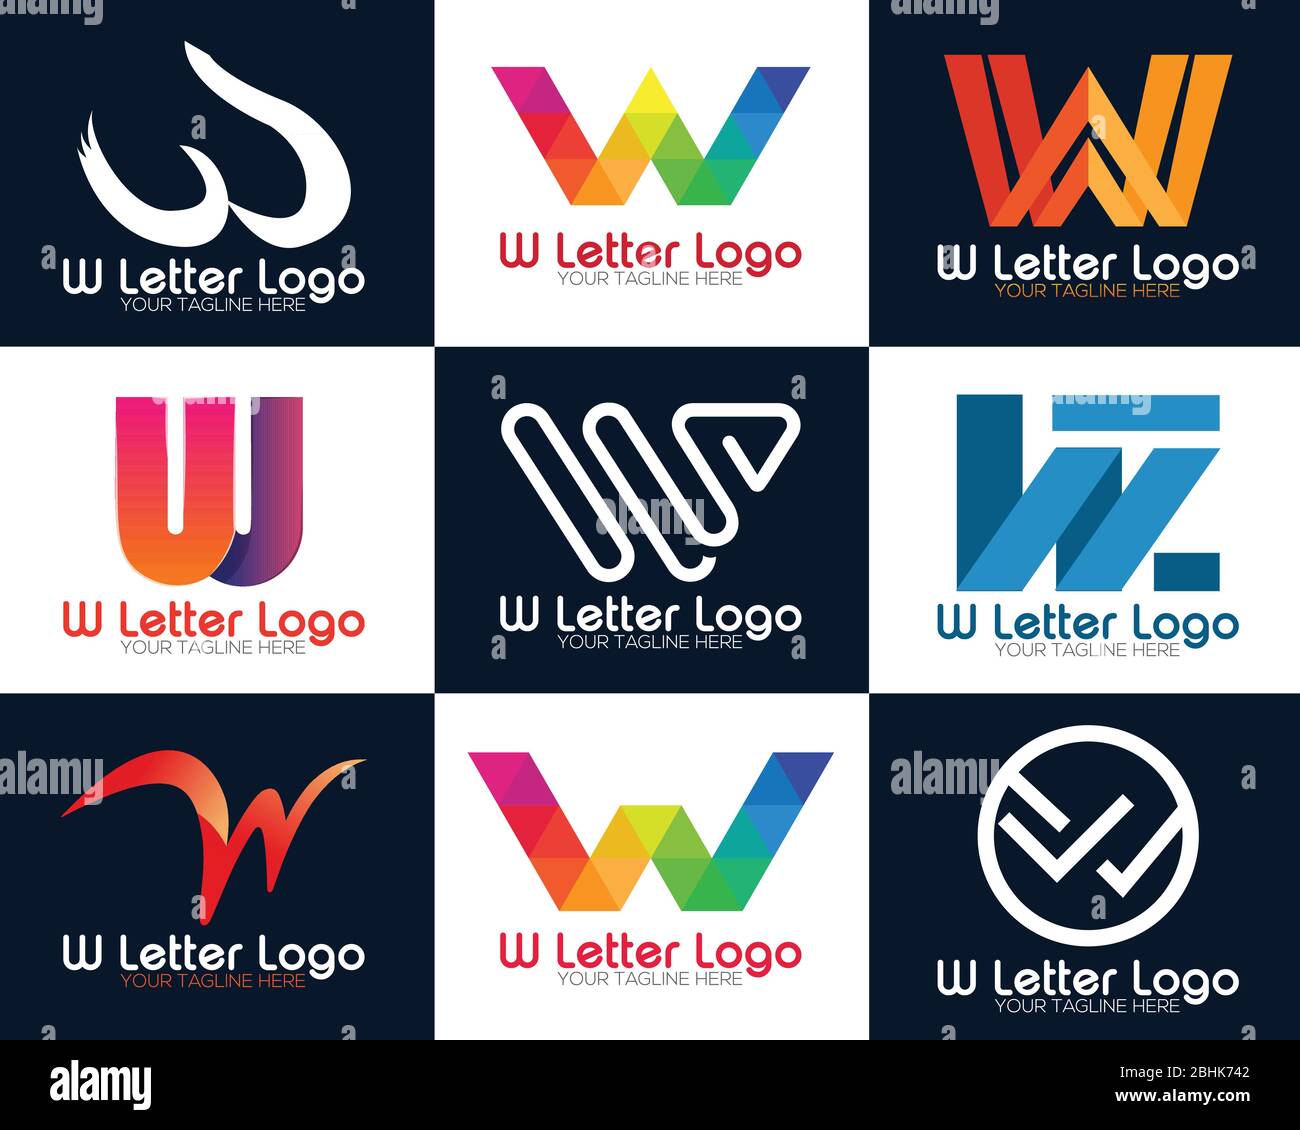 Initial letter W logo collection vector design template. Letter W logo icon design template elements. Stock Vector